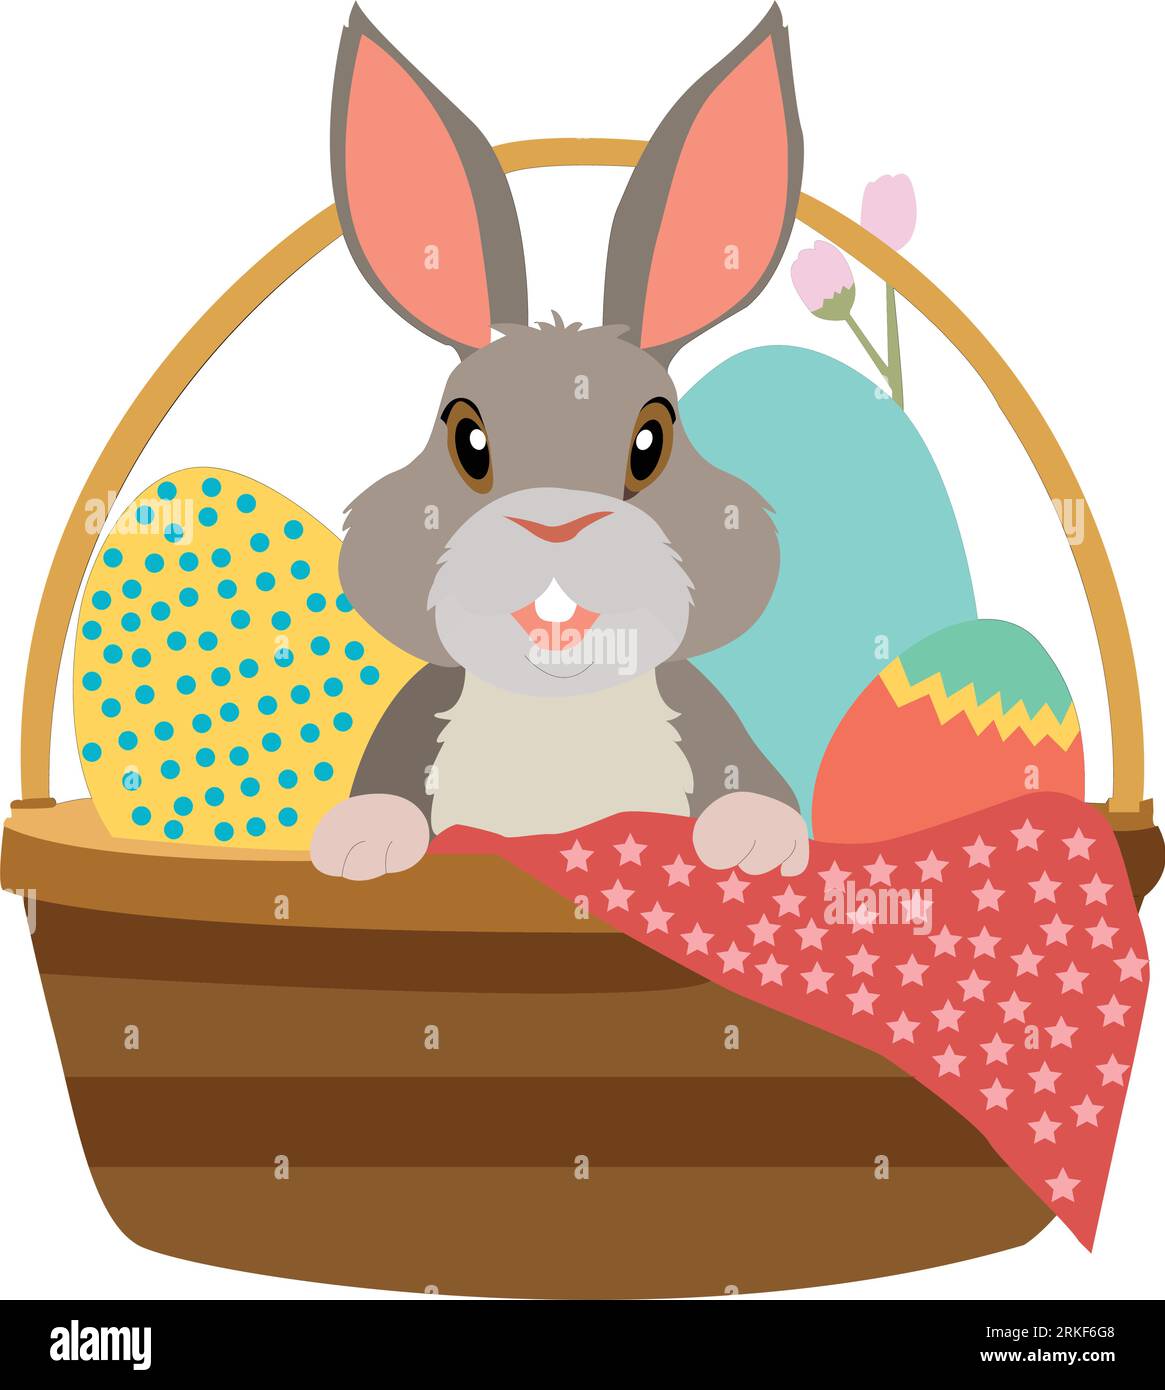 Easter Bunny with Easter egg. Black and white vector illustration for coloring book. Perfect for kids book. Stock Vector